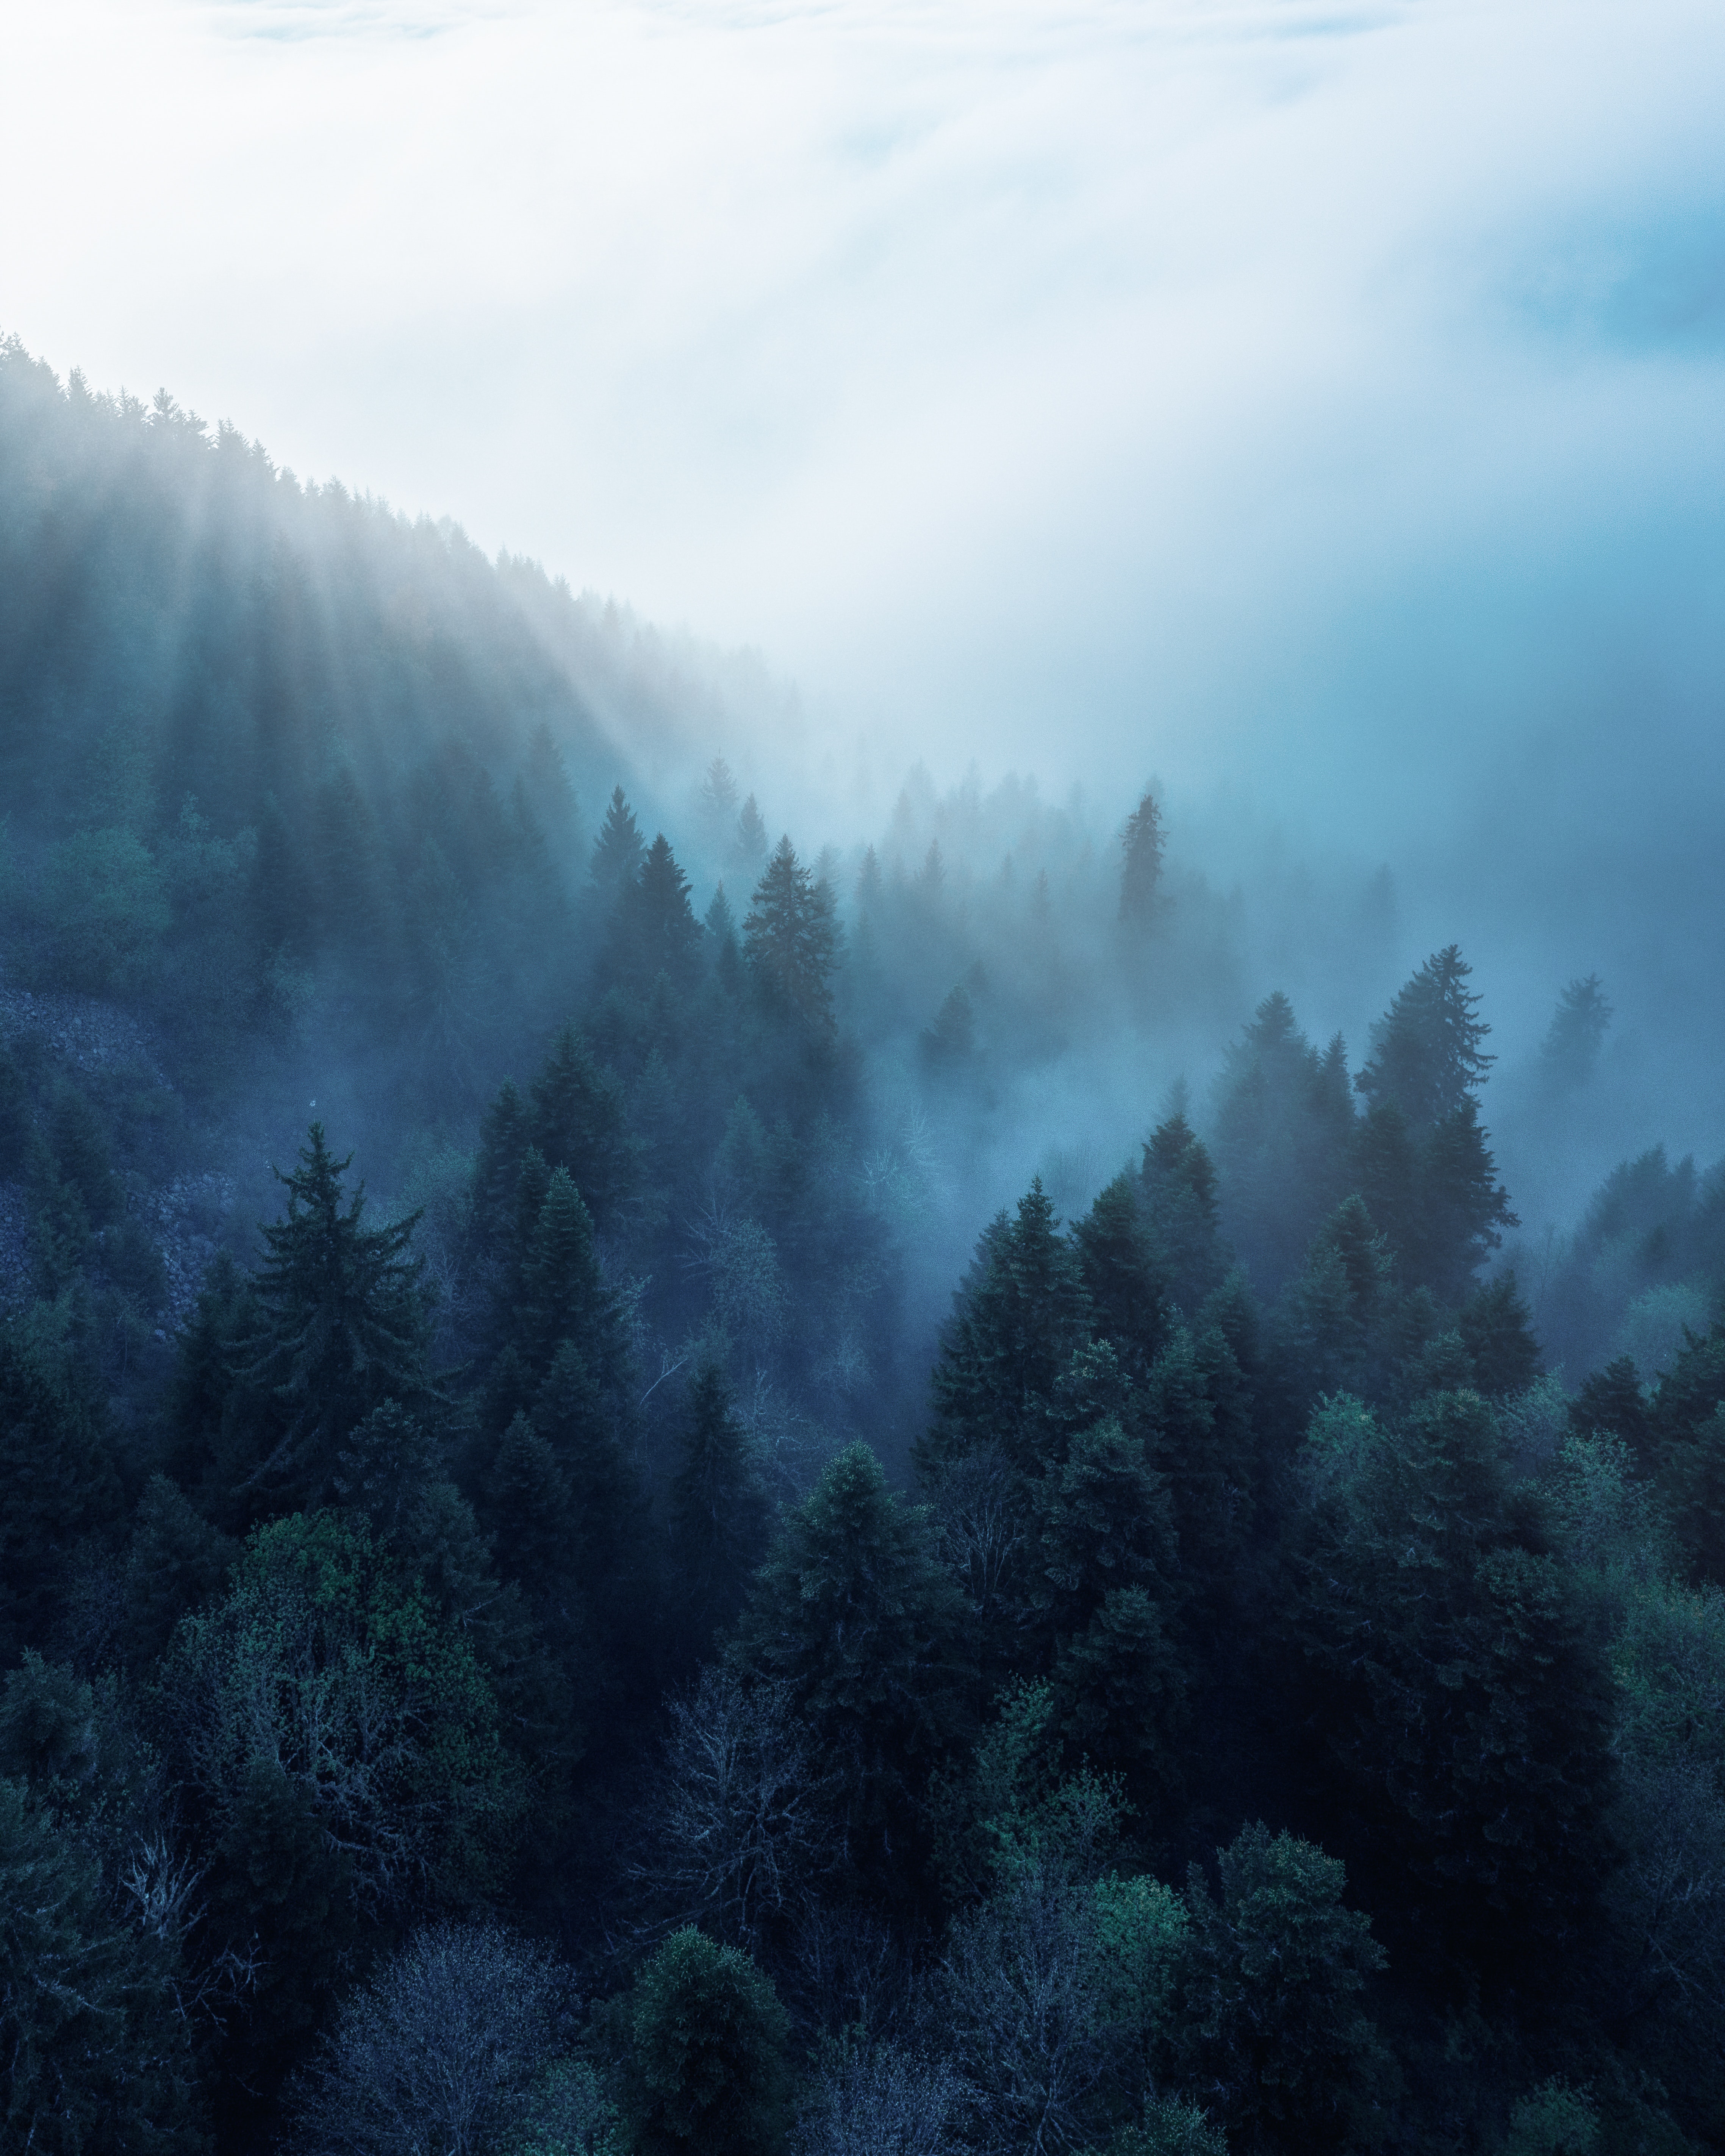 rays, fog, trees, nature, beams, forest